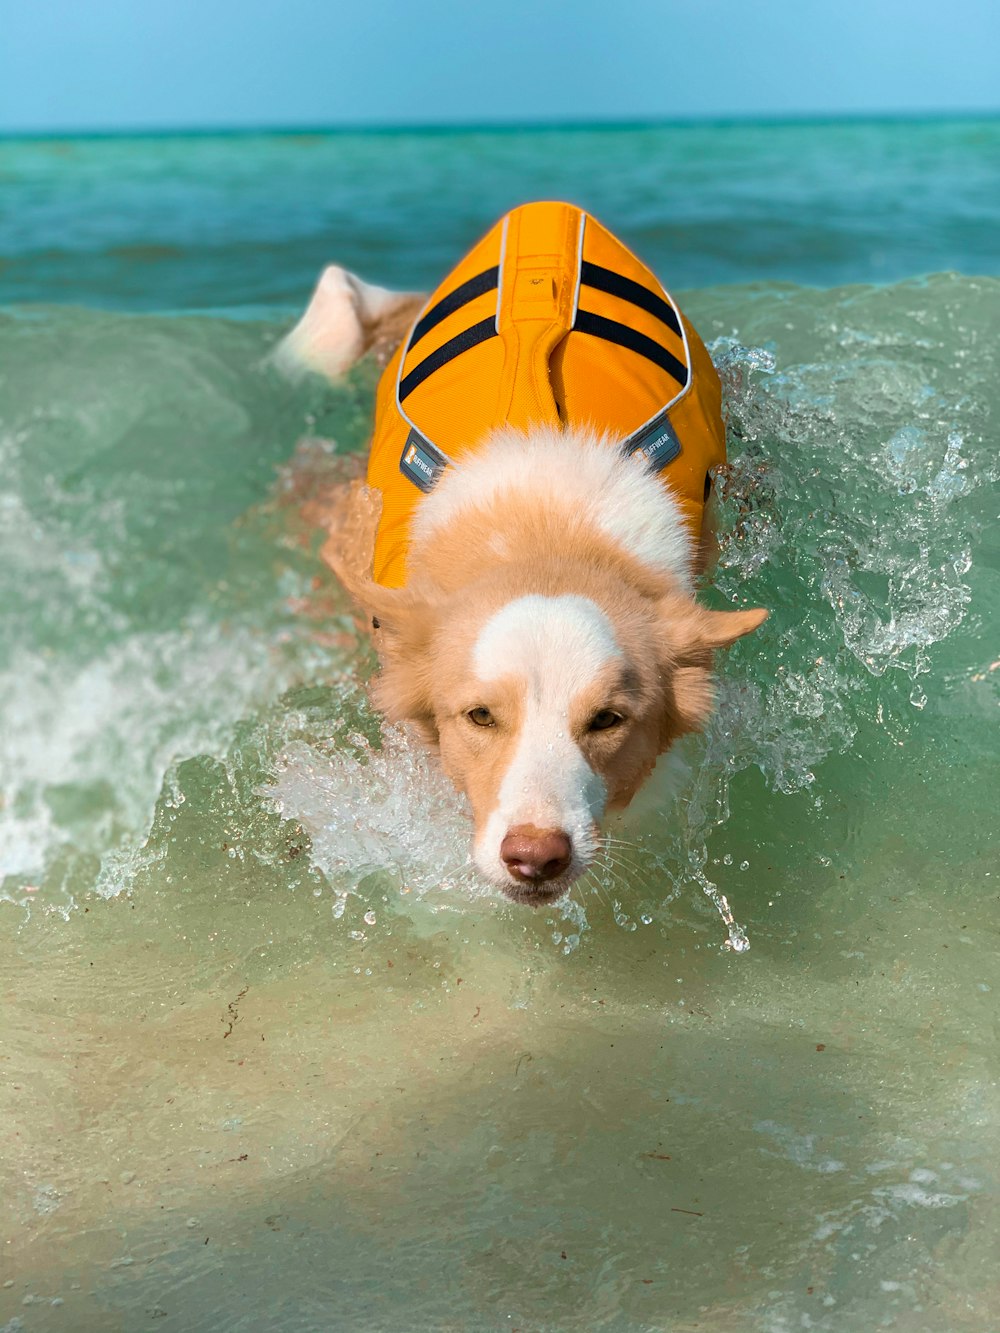 white and brown short coated dog in yellow and orange life vest on water during daytime